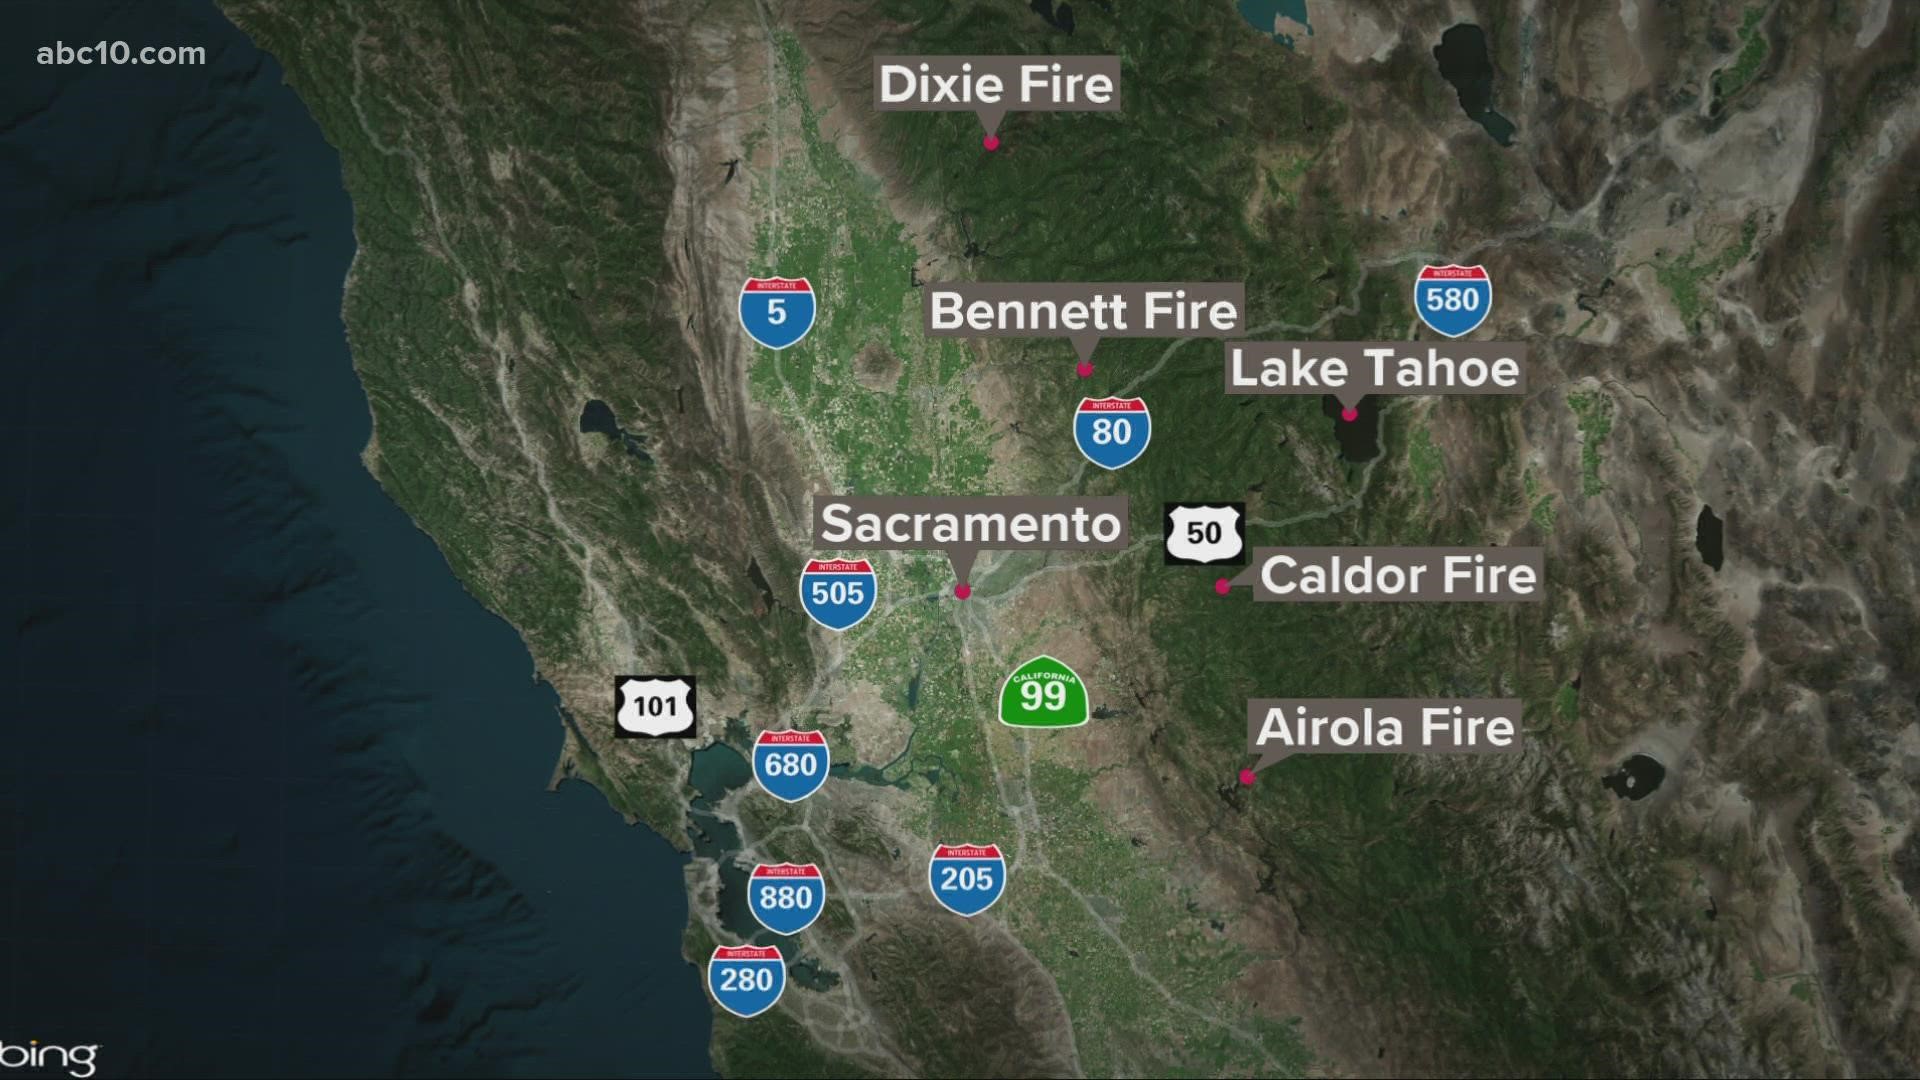 Two fires popped up Wednesday night, marking at least four notable fires burning in Northern California.